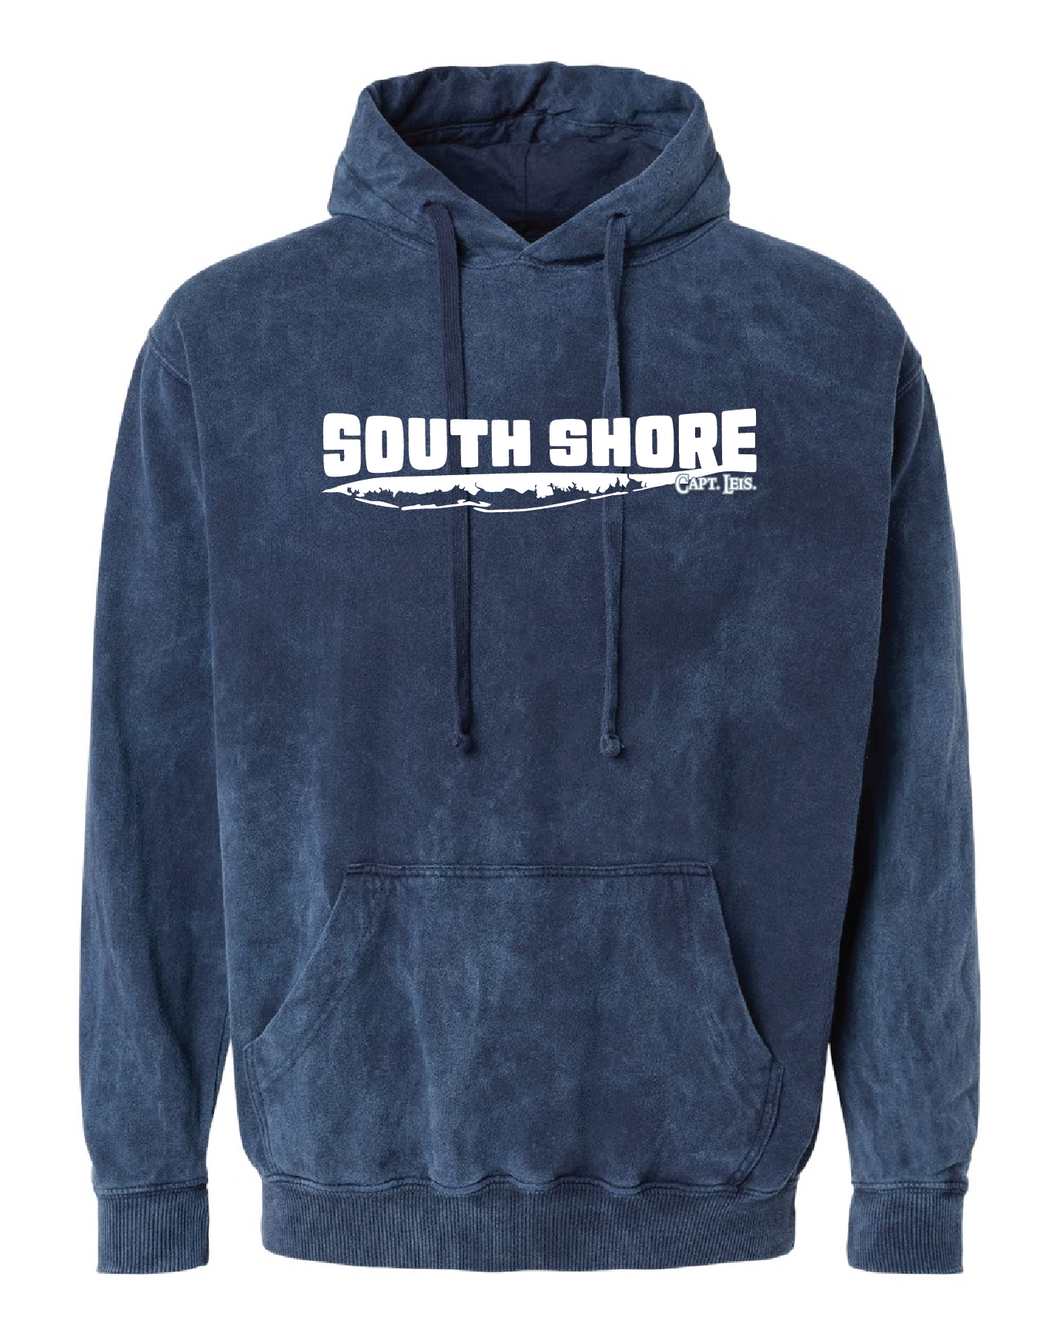 SALE: South Shore Mineral Wash Hoodie - Navy